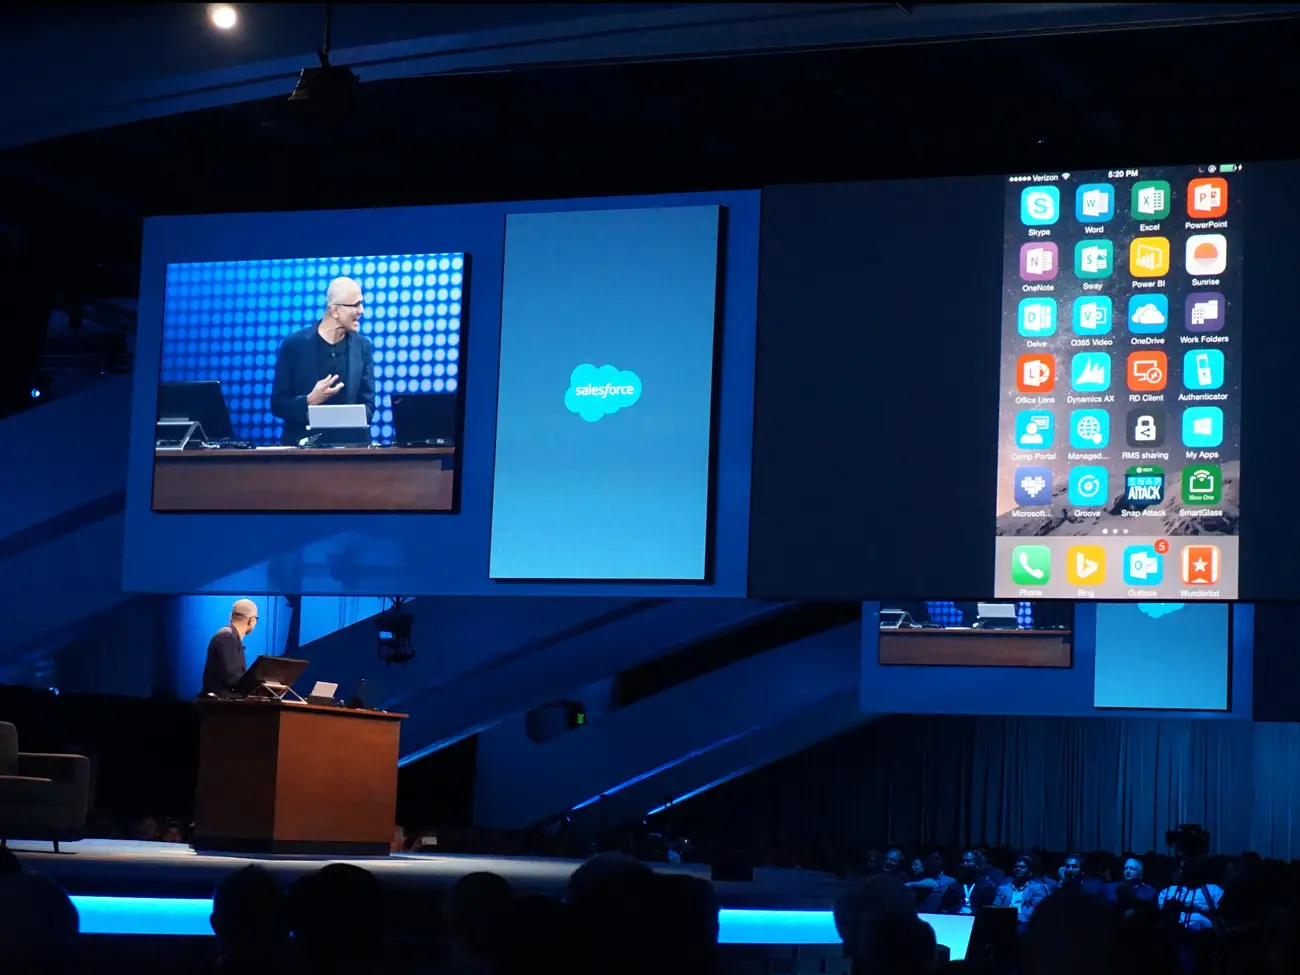 Microsoft CEO Satya Nadella using an iPhone to demonstrate the Outlook mobile app.Business Insider